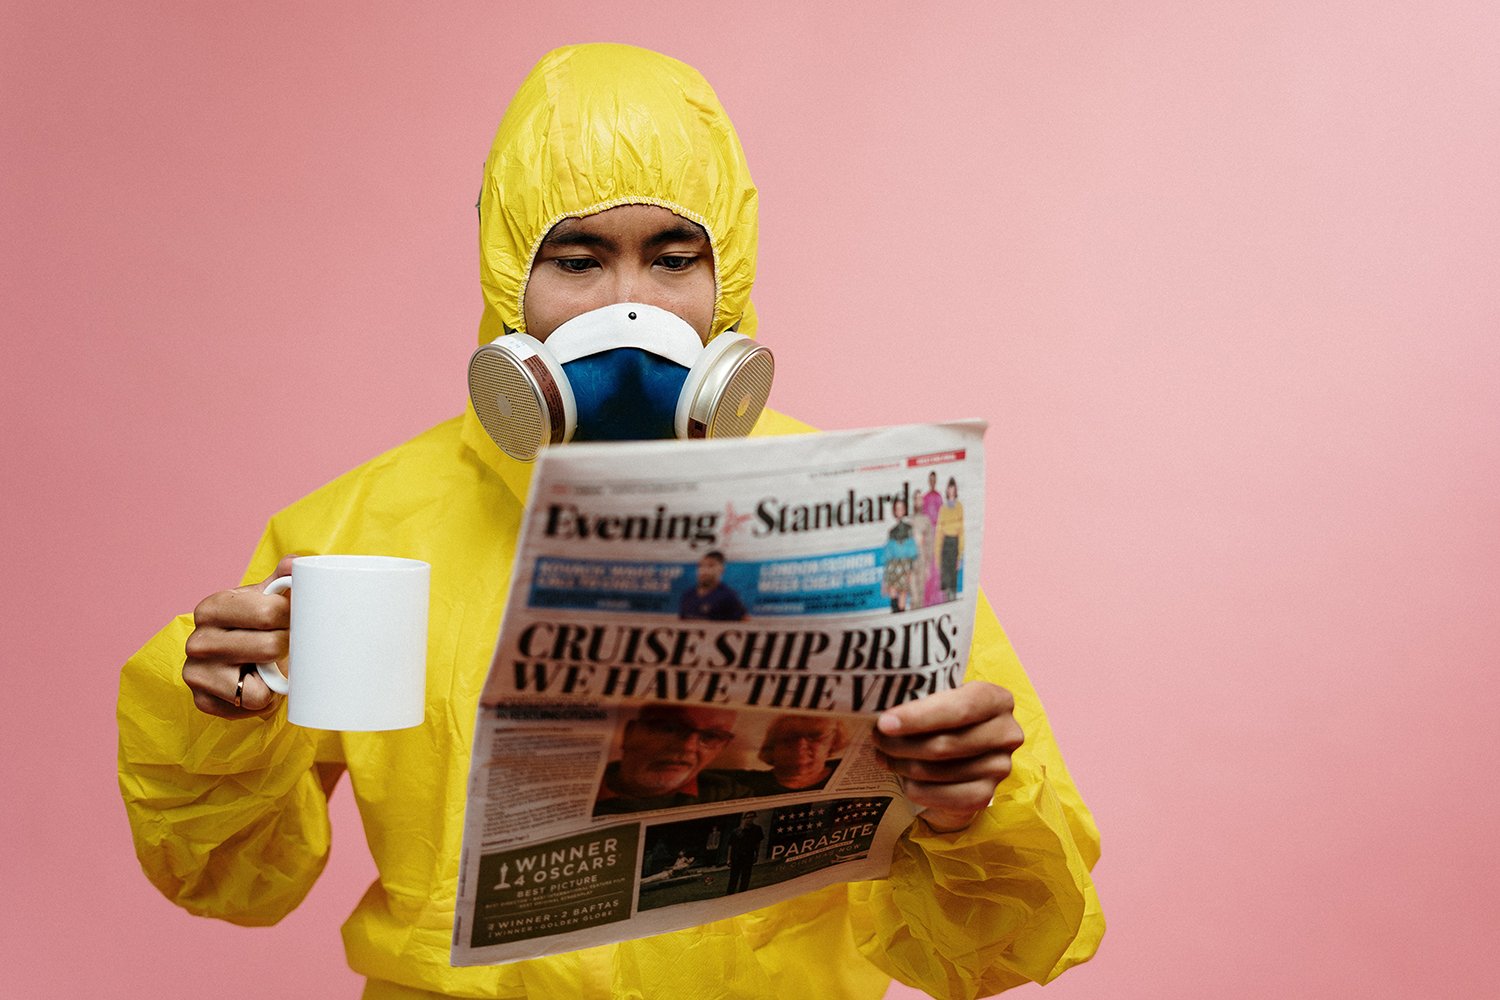 Man in hazmat suit drinking coffee and reading newspaper